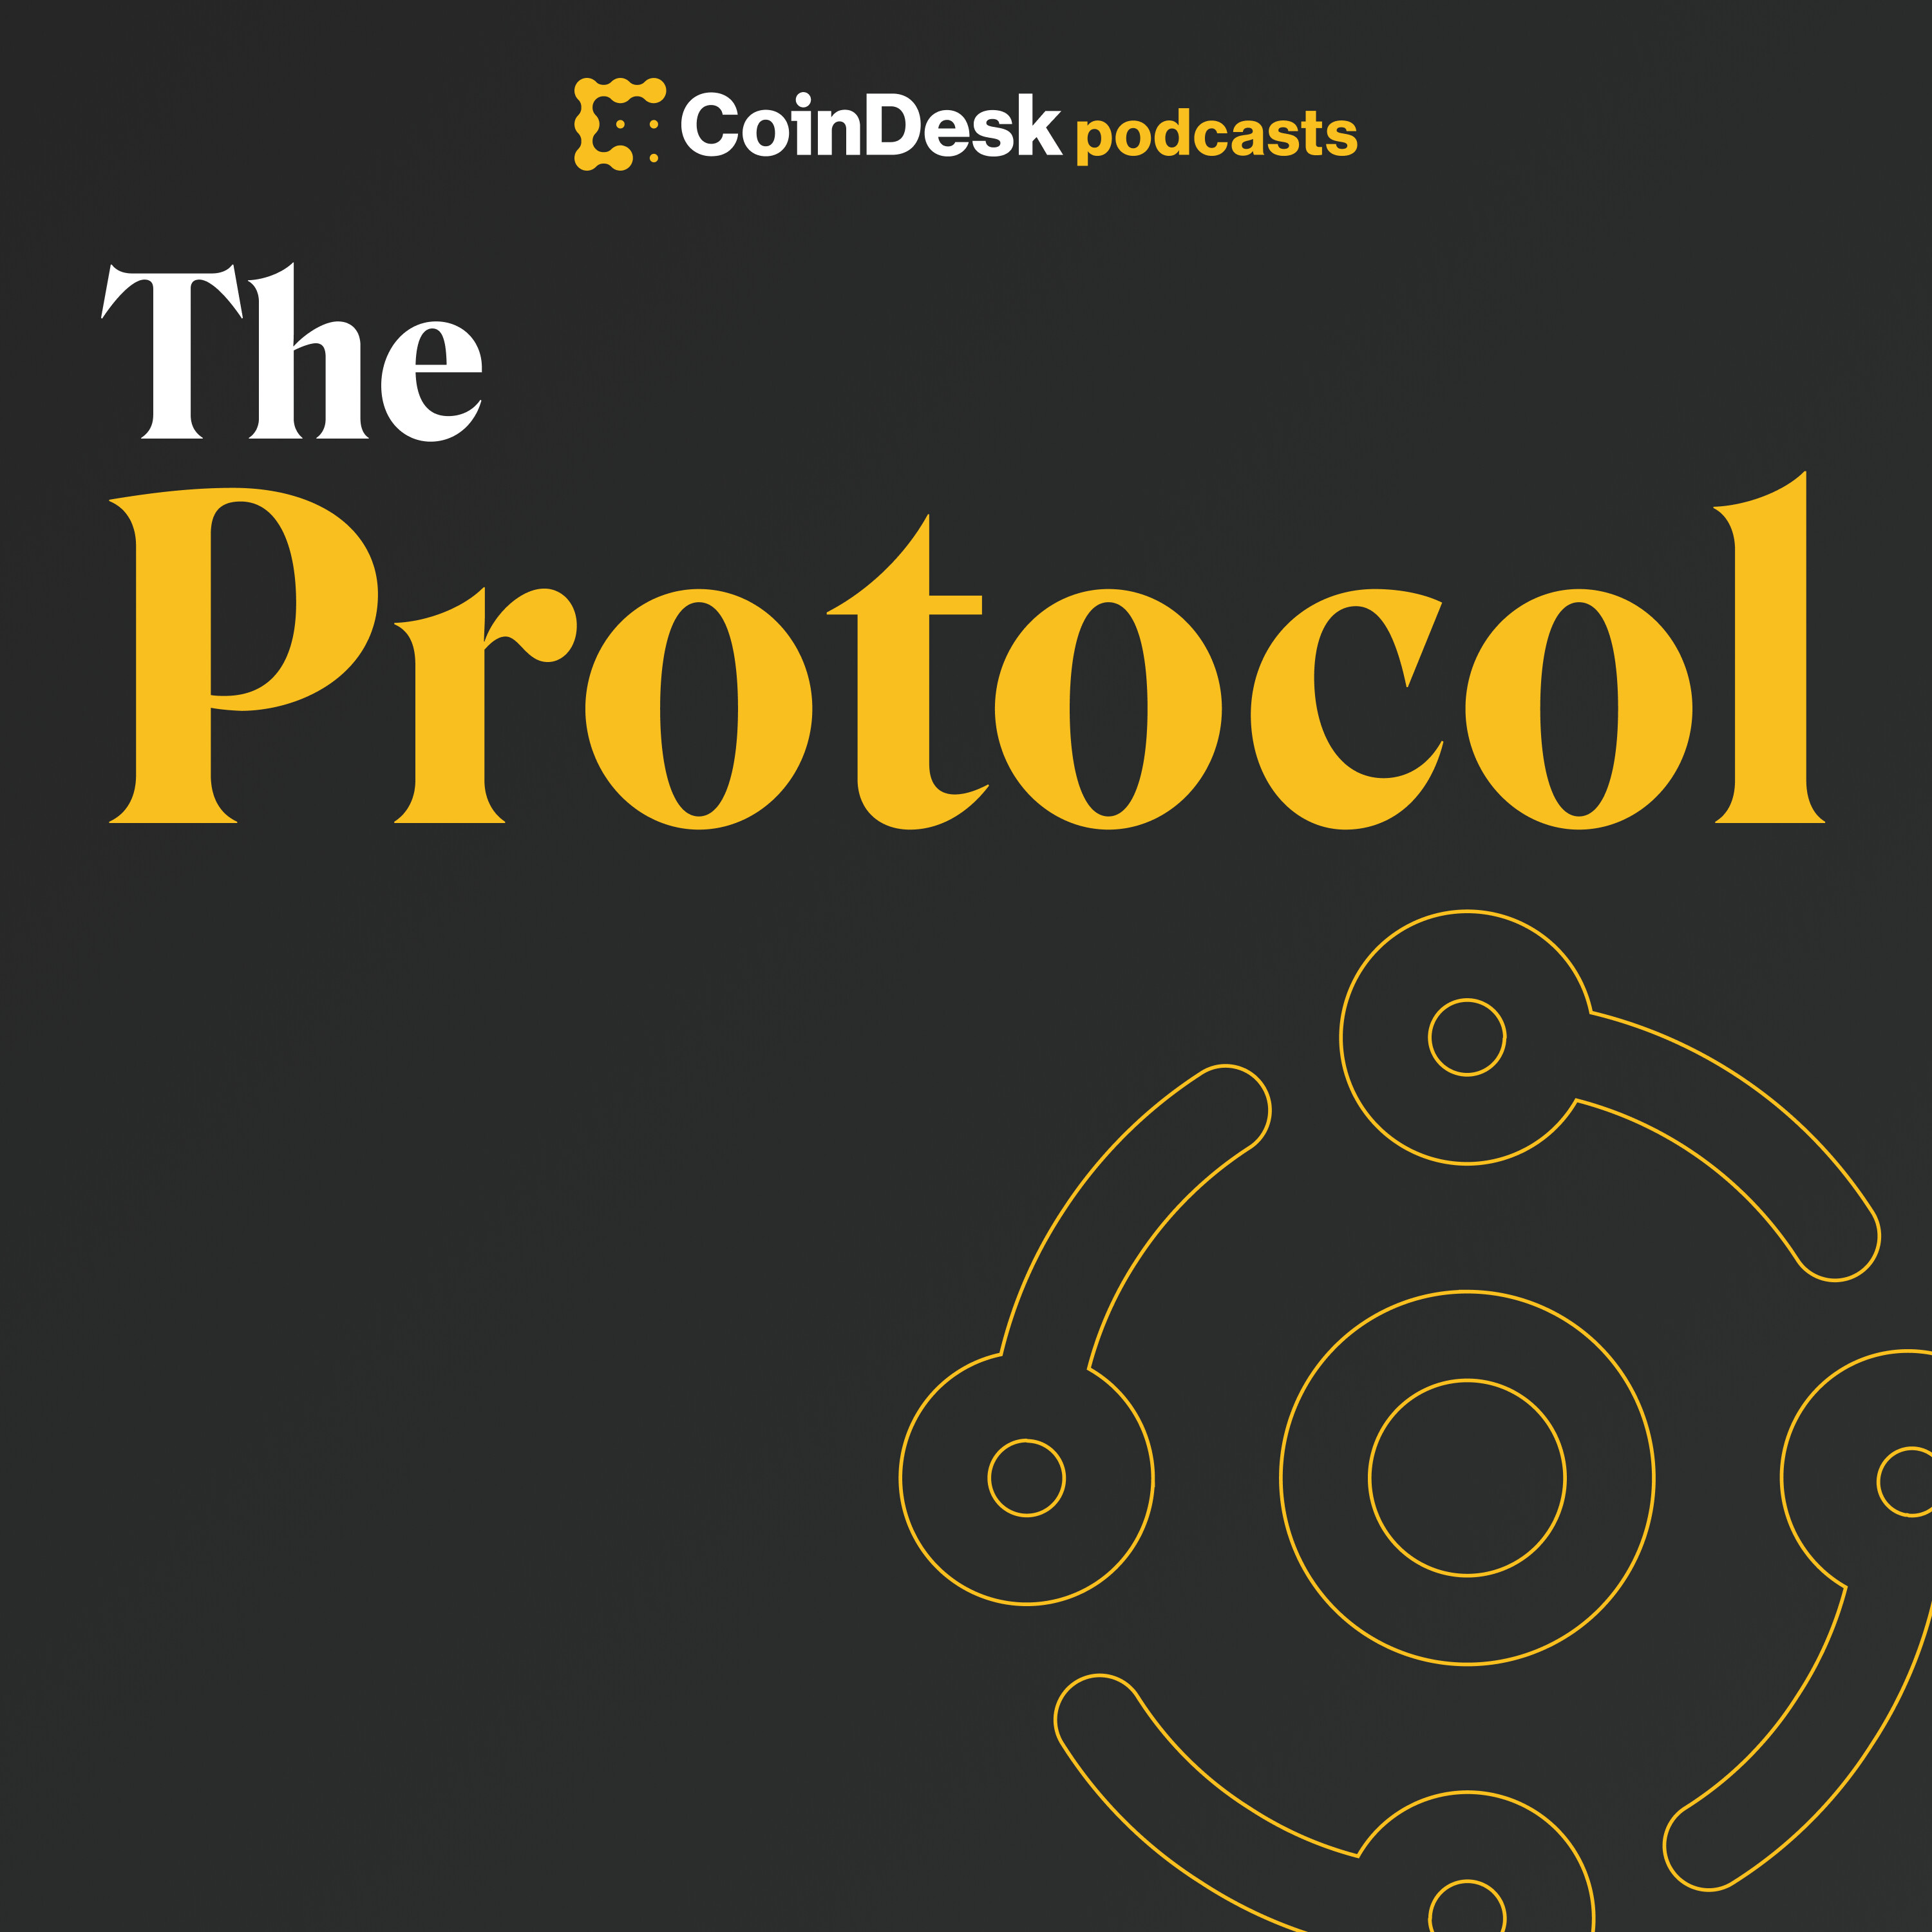 THE PROTOCOL: Inside the MIT Brothers' Ethereum Exploit